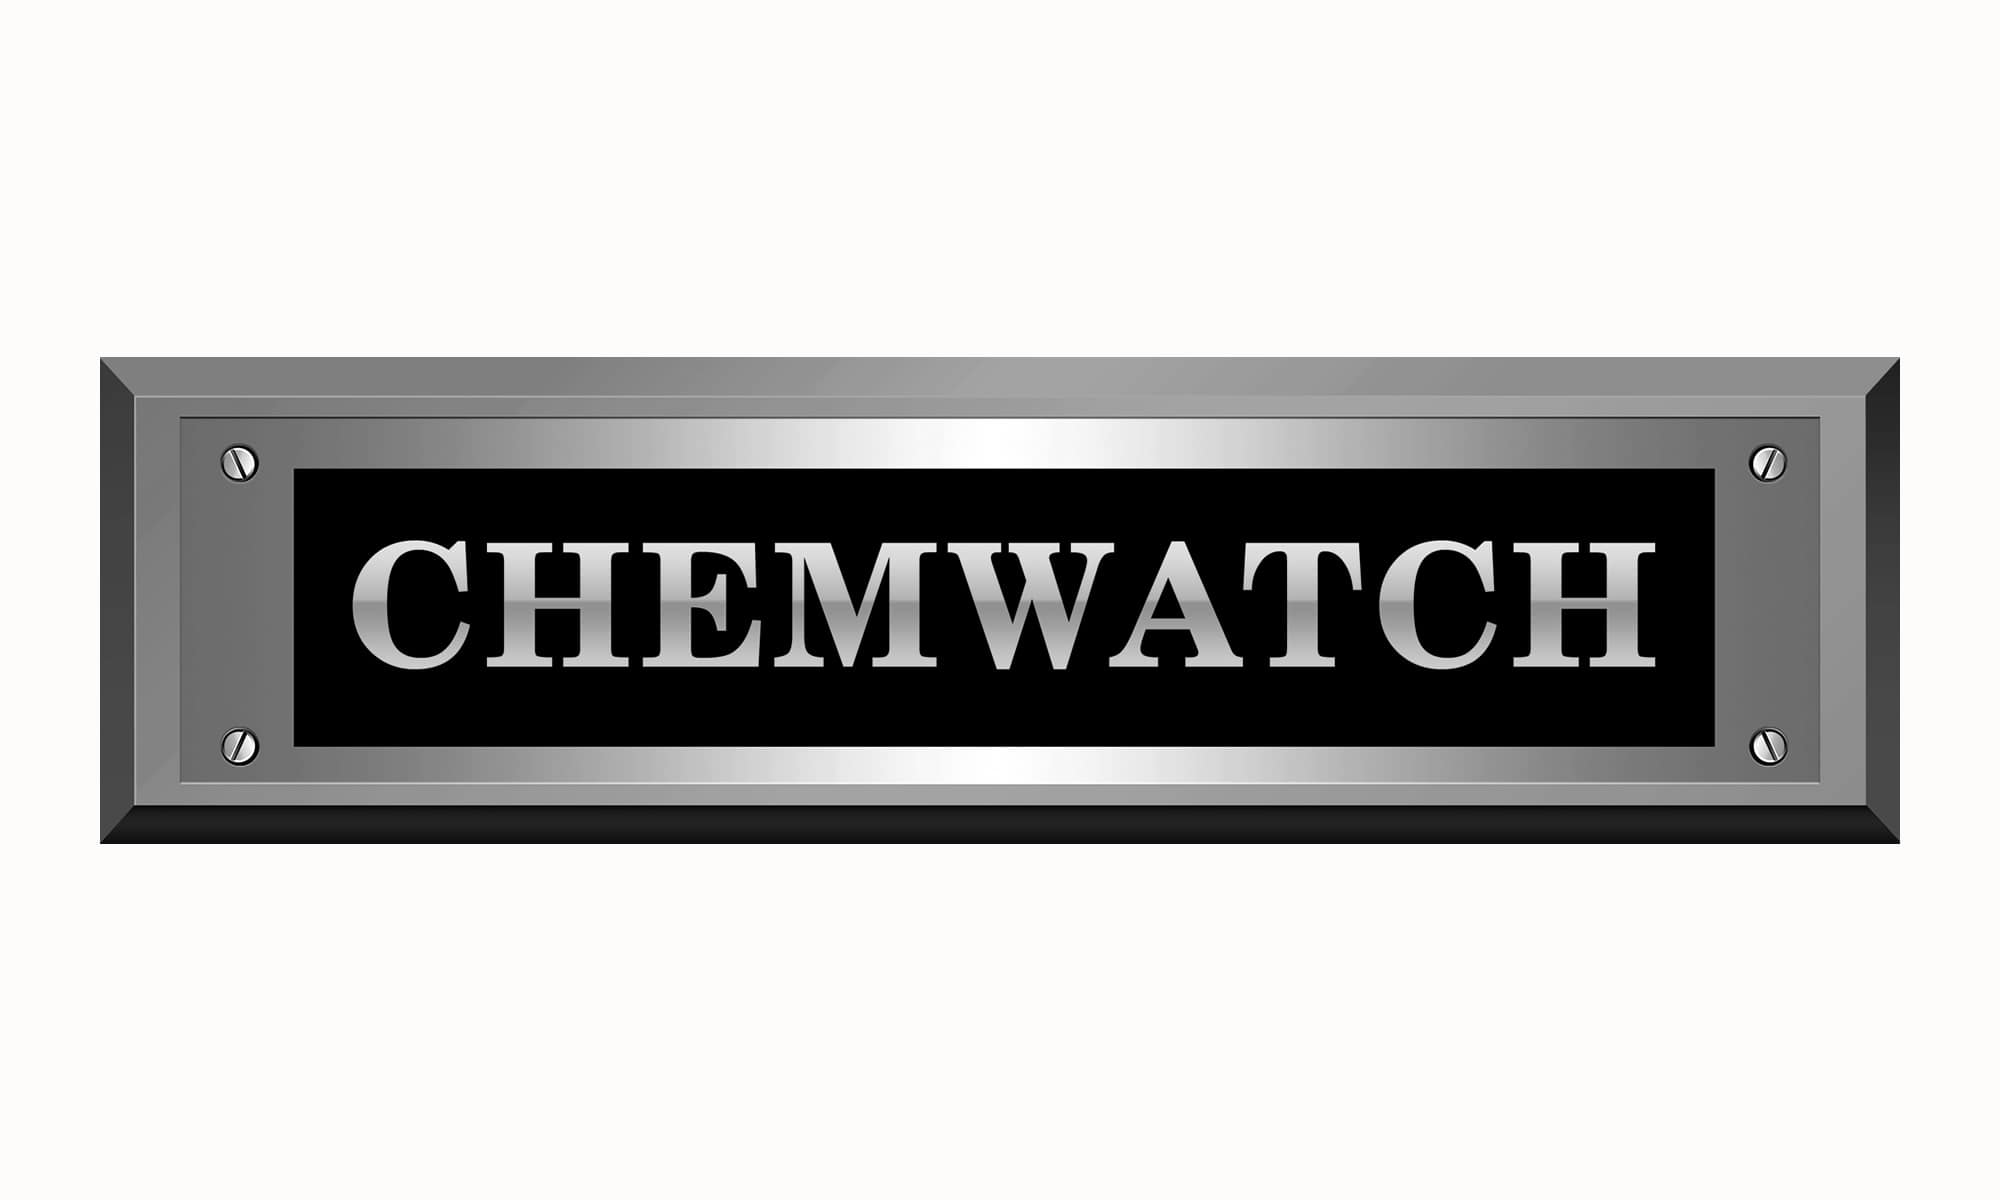 Chemwatch is an online chemical management system that provides access to Safety Data Sheets (SDS) and allows areas to create their local chemical registers to help keep track of their chemical inventories.